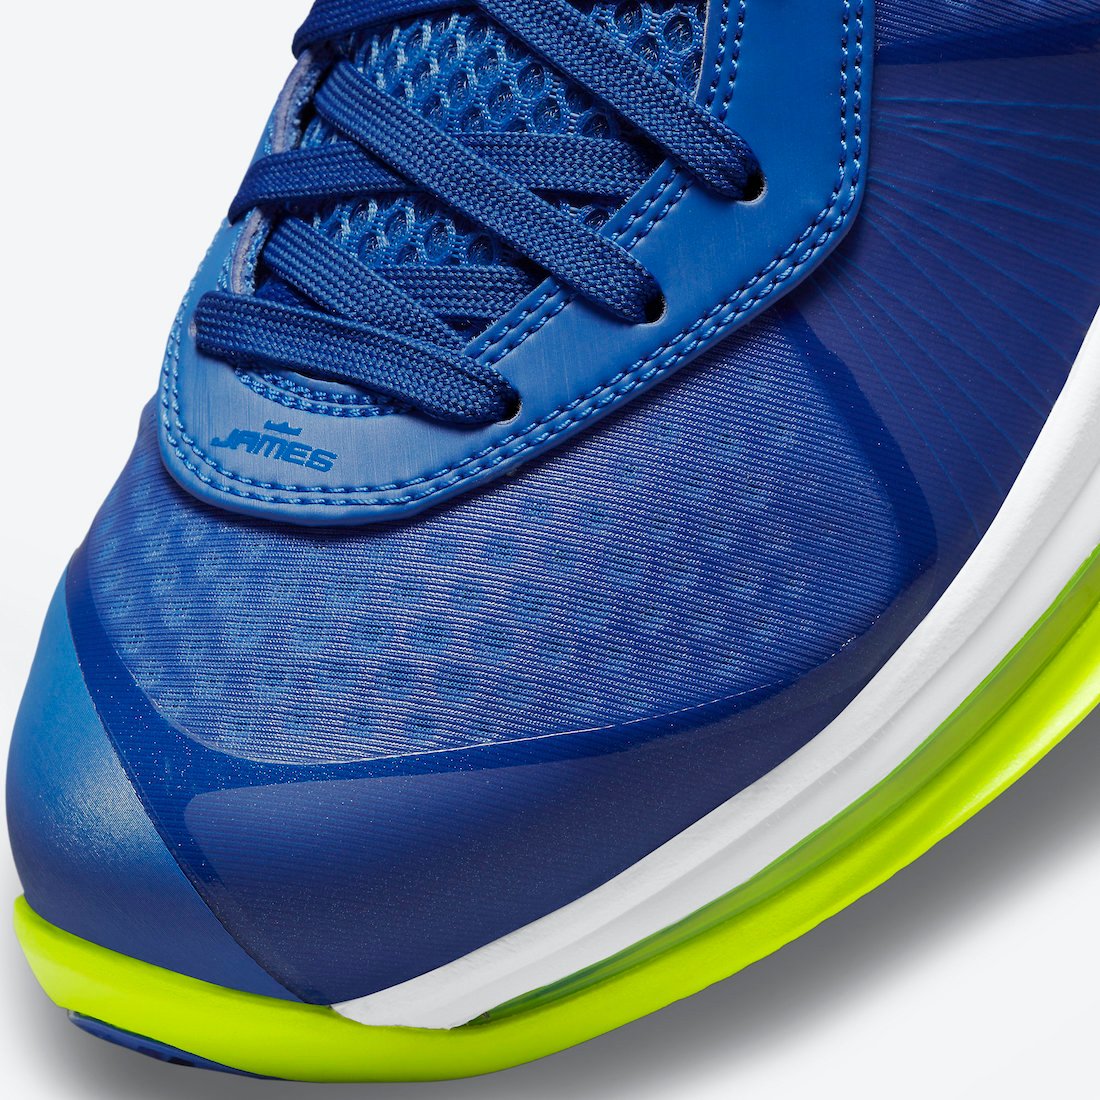 Nike LeBron 8 V2 Low Sprite 2021 DN1581-400 Release Date Info ...